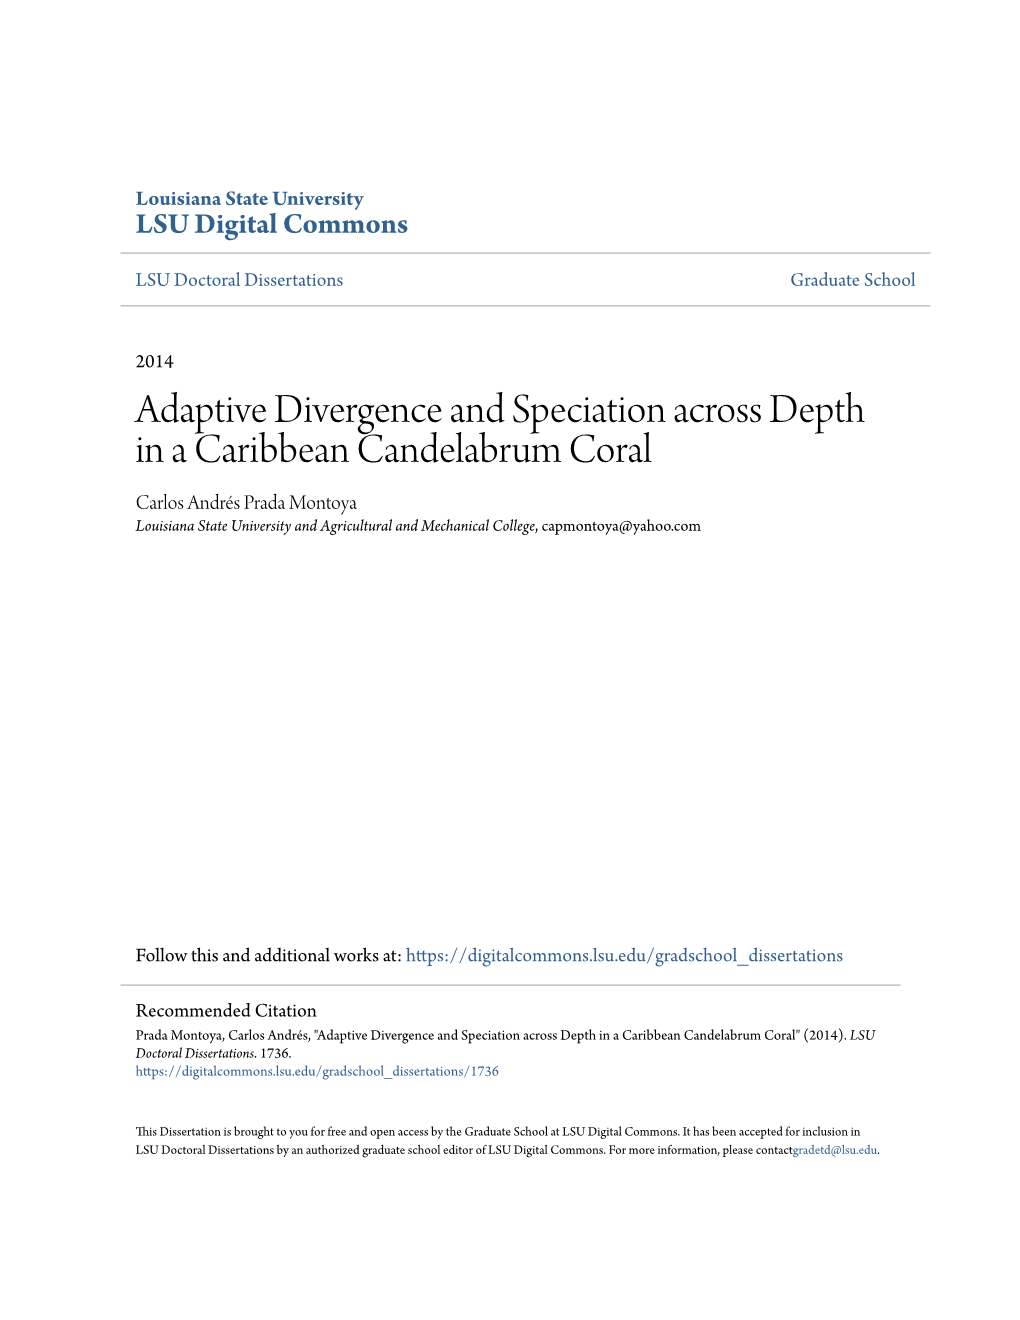 Adaptive Divergence and Speciation Across Depth in a Caribbean